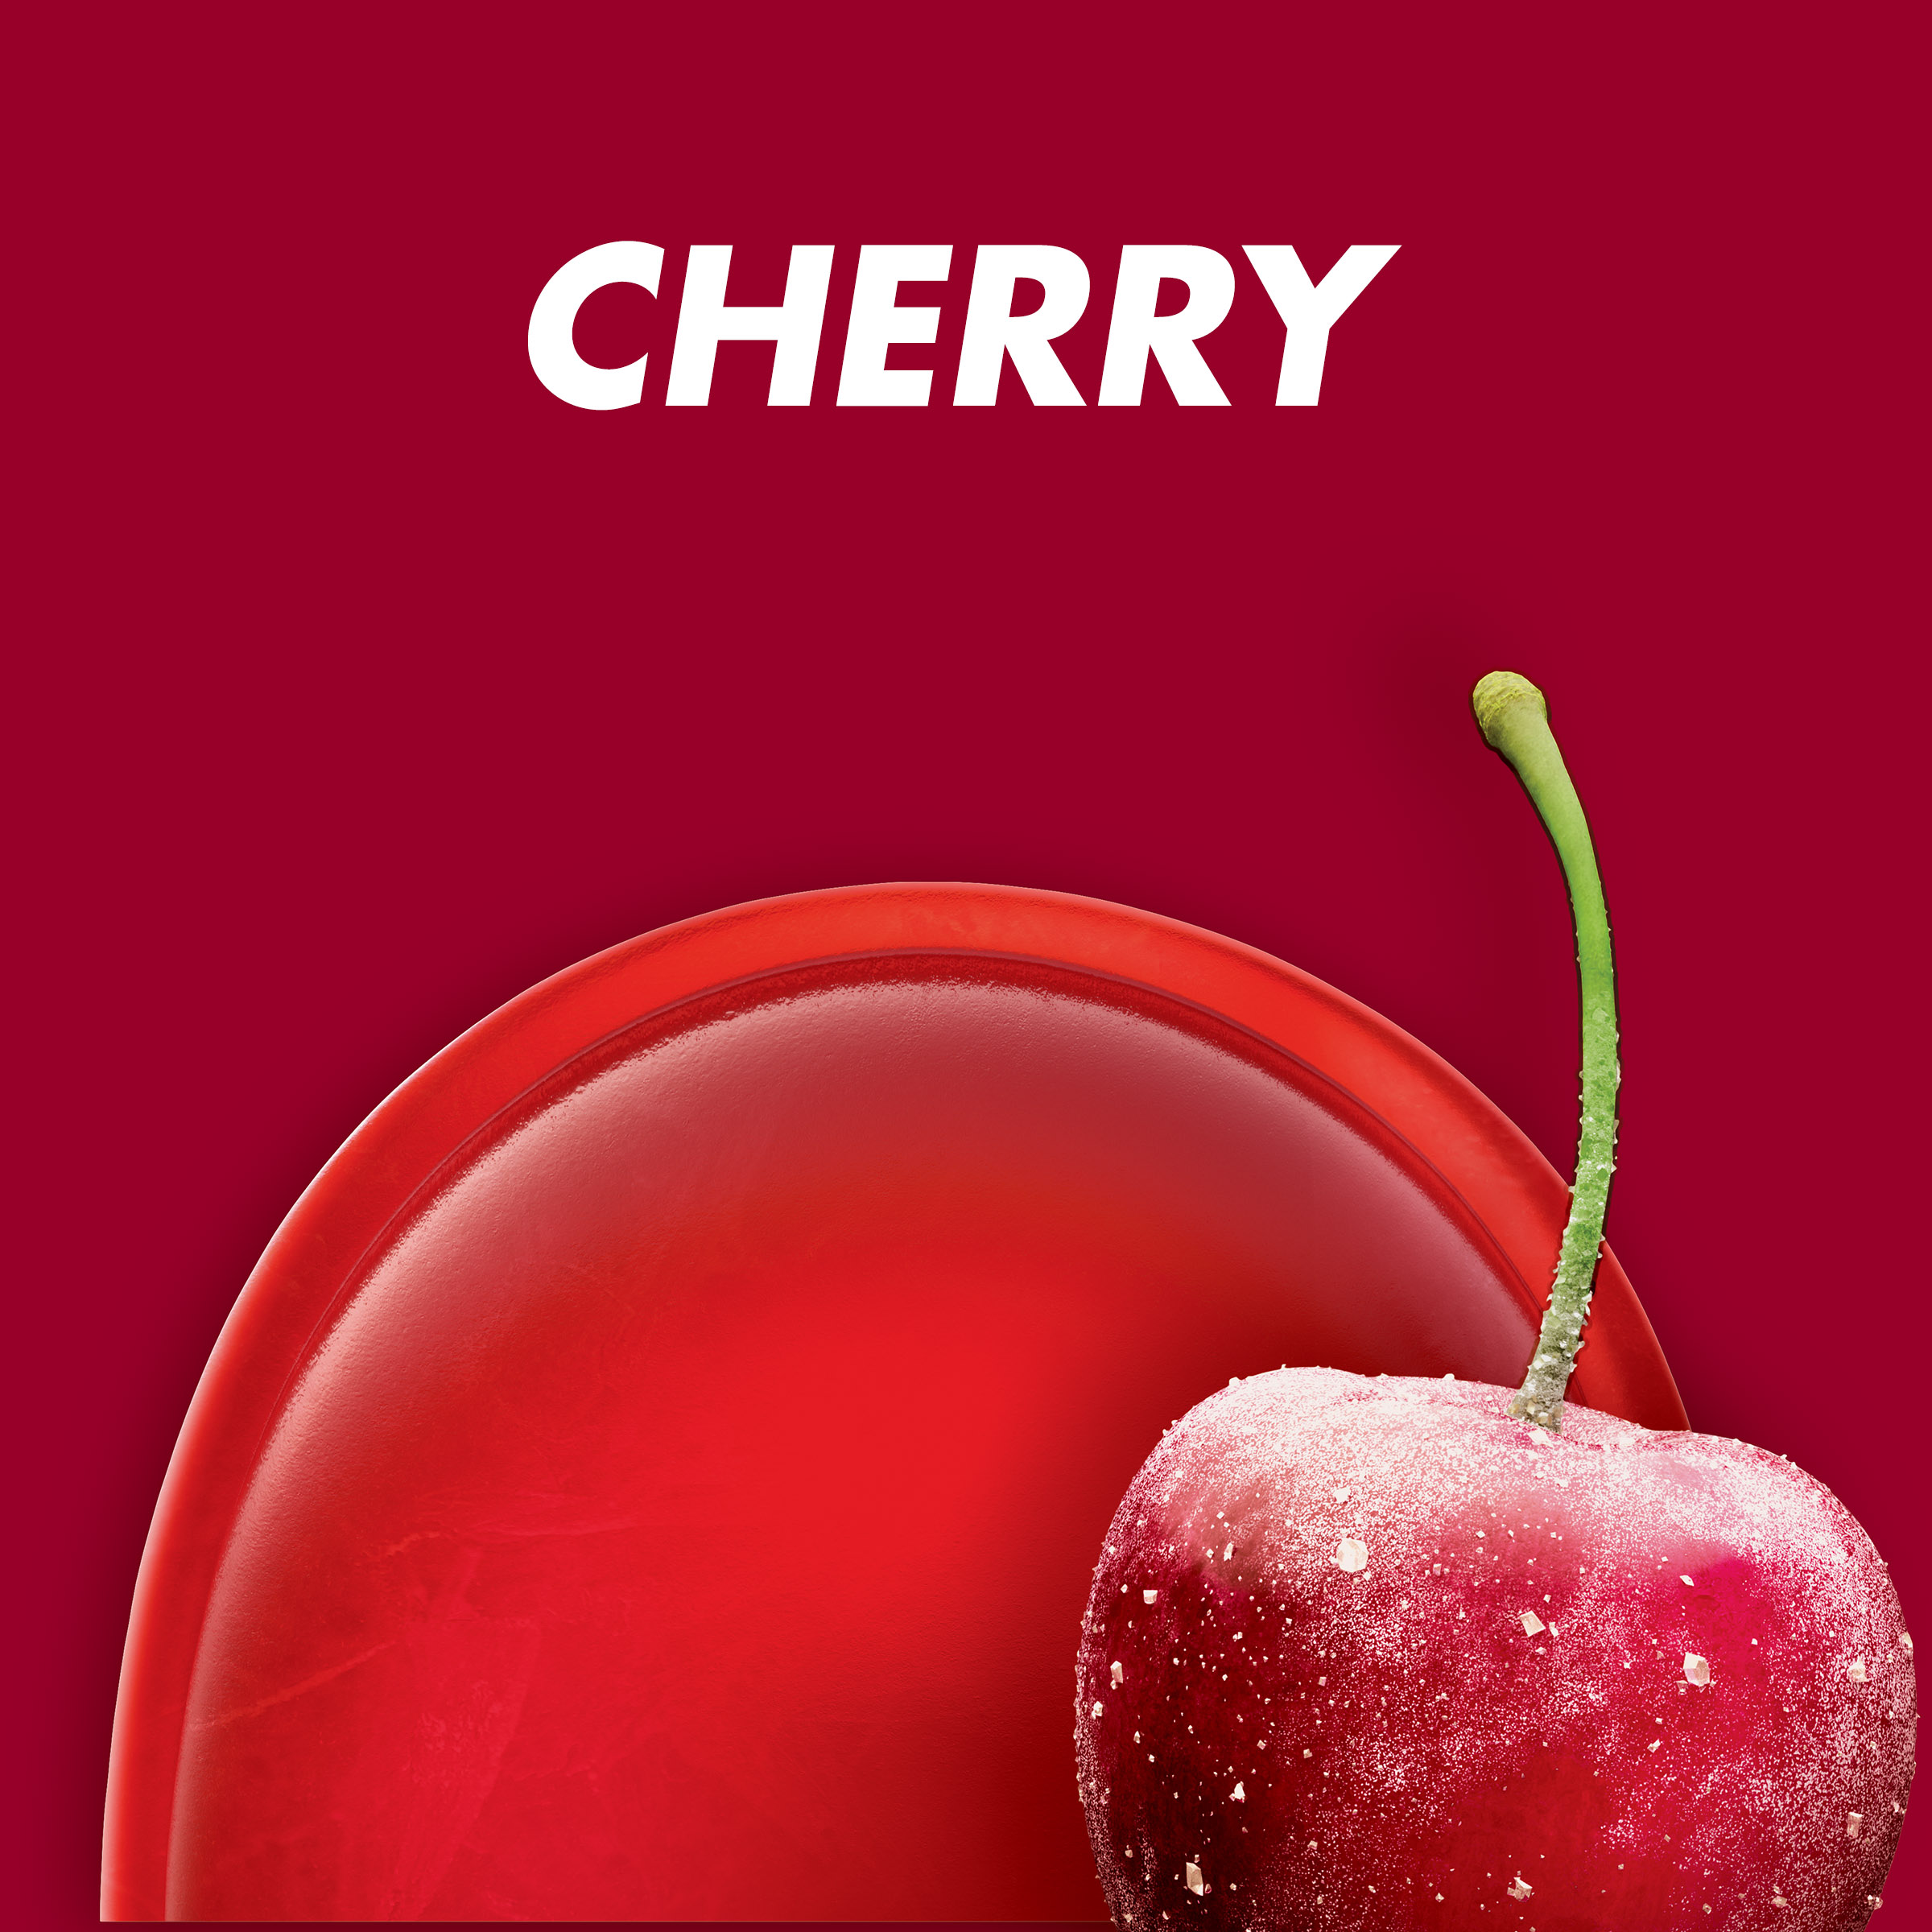 HALLS Relief Cherry Cough Drops, Economy Pack, 80 Drops - image 3 of 12